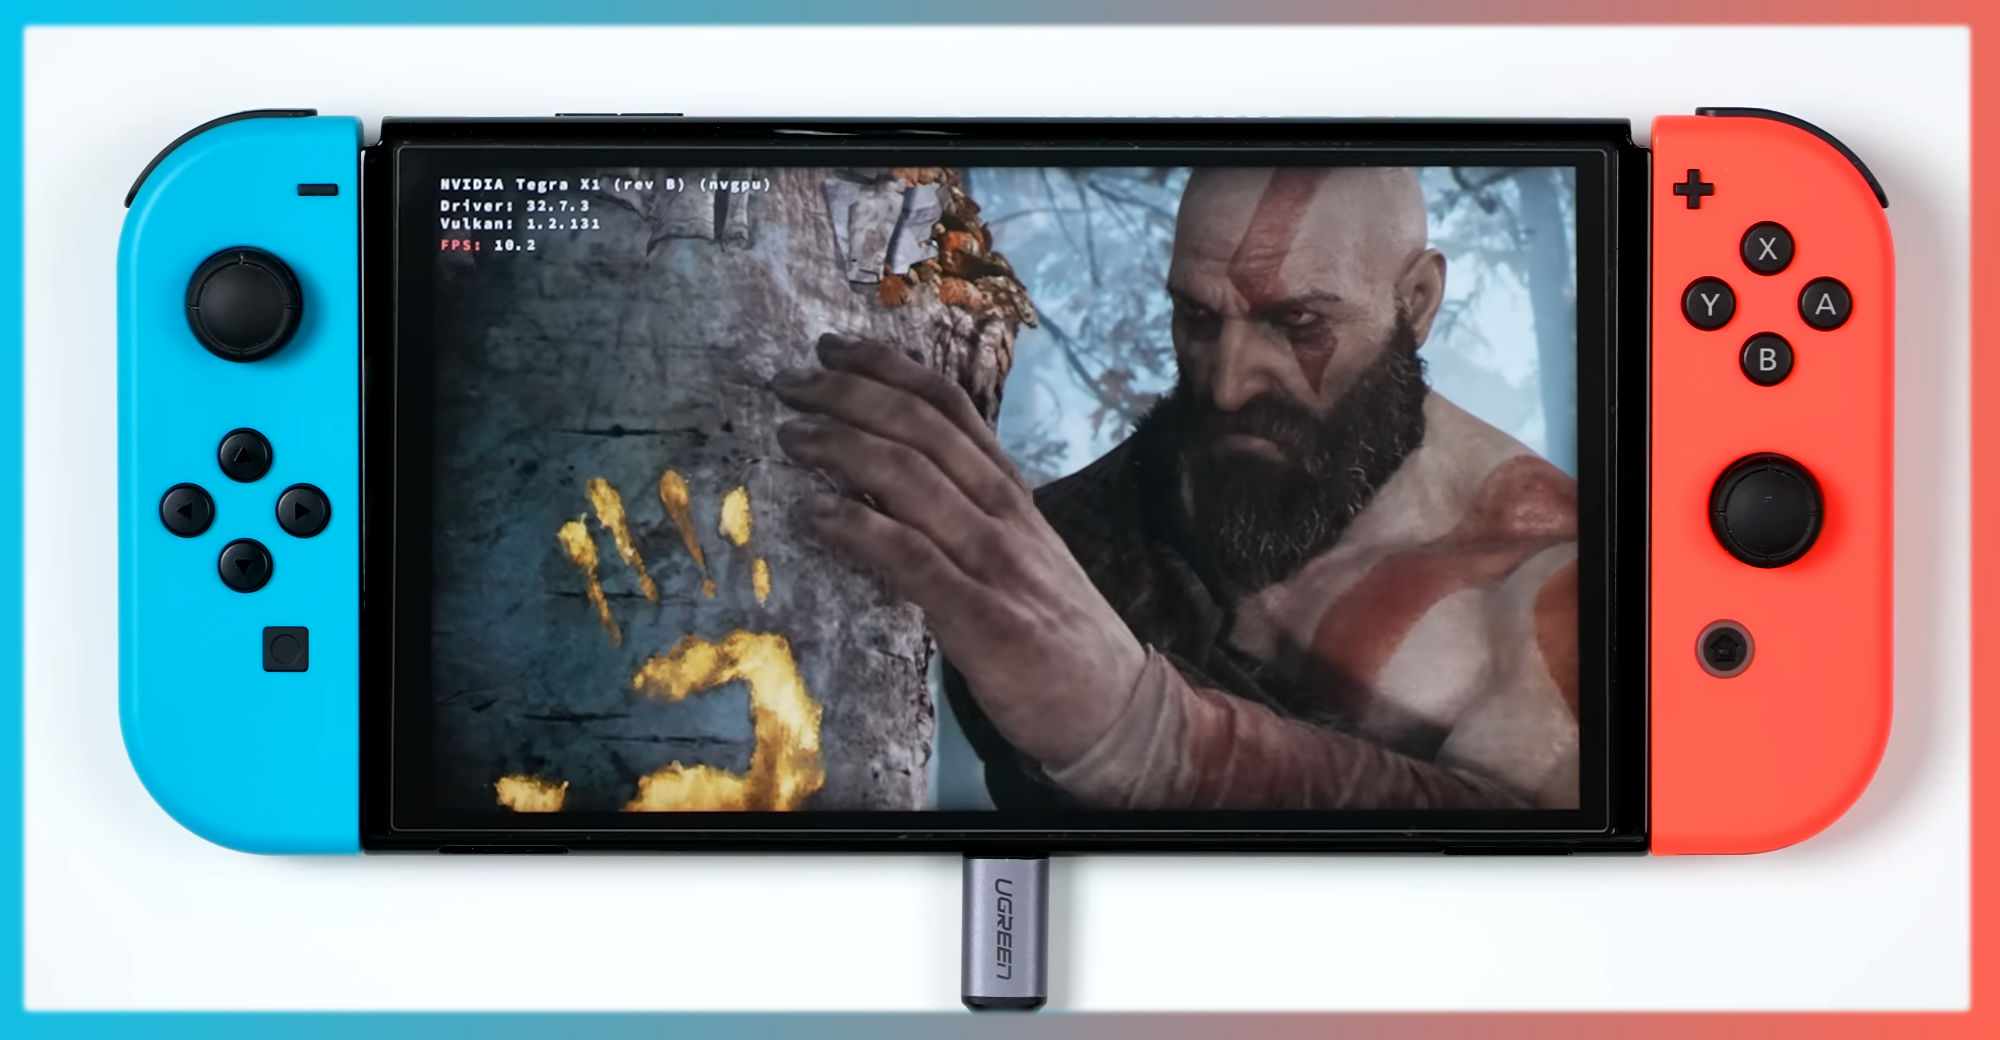 Nintendo Switch modded and overclocked to run modern PC games